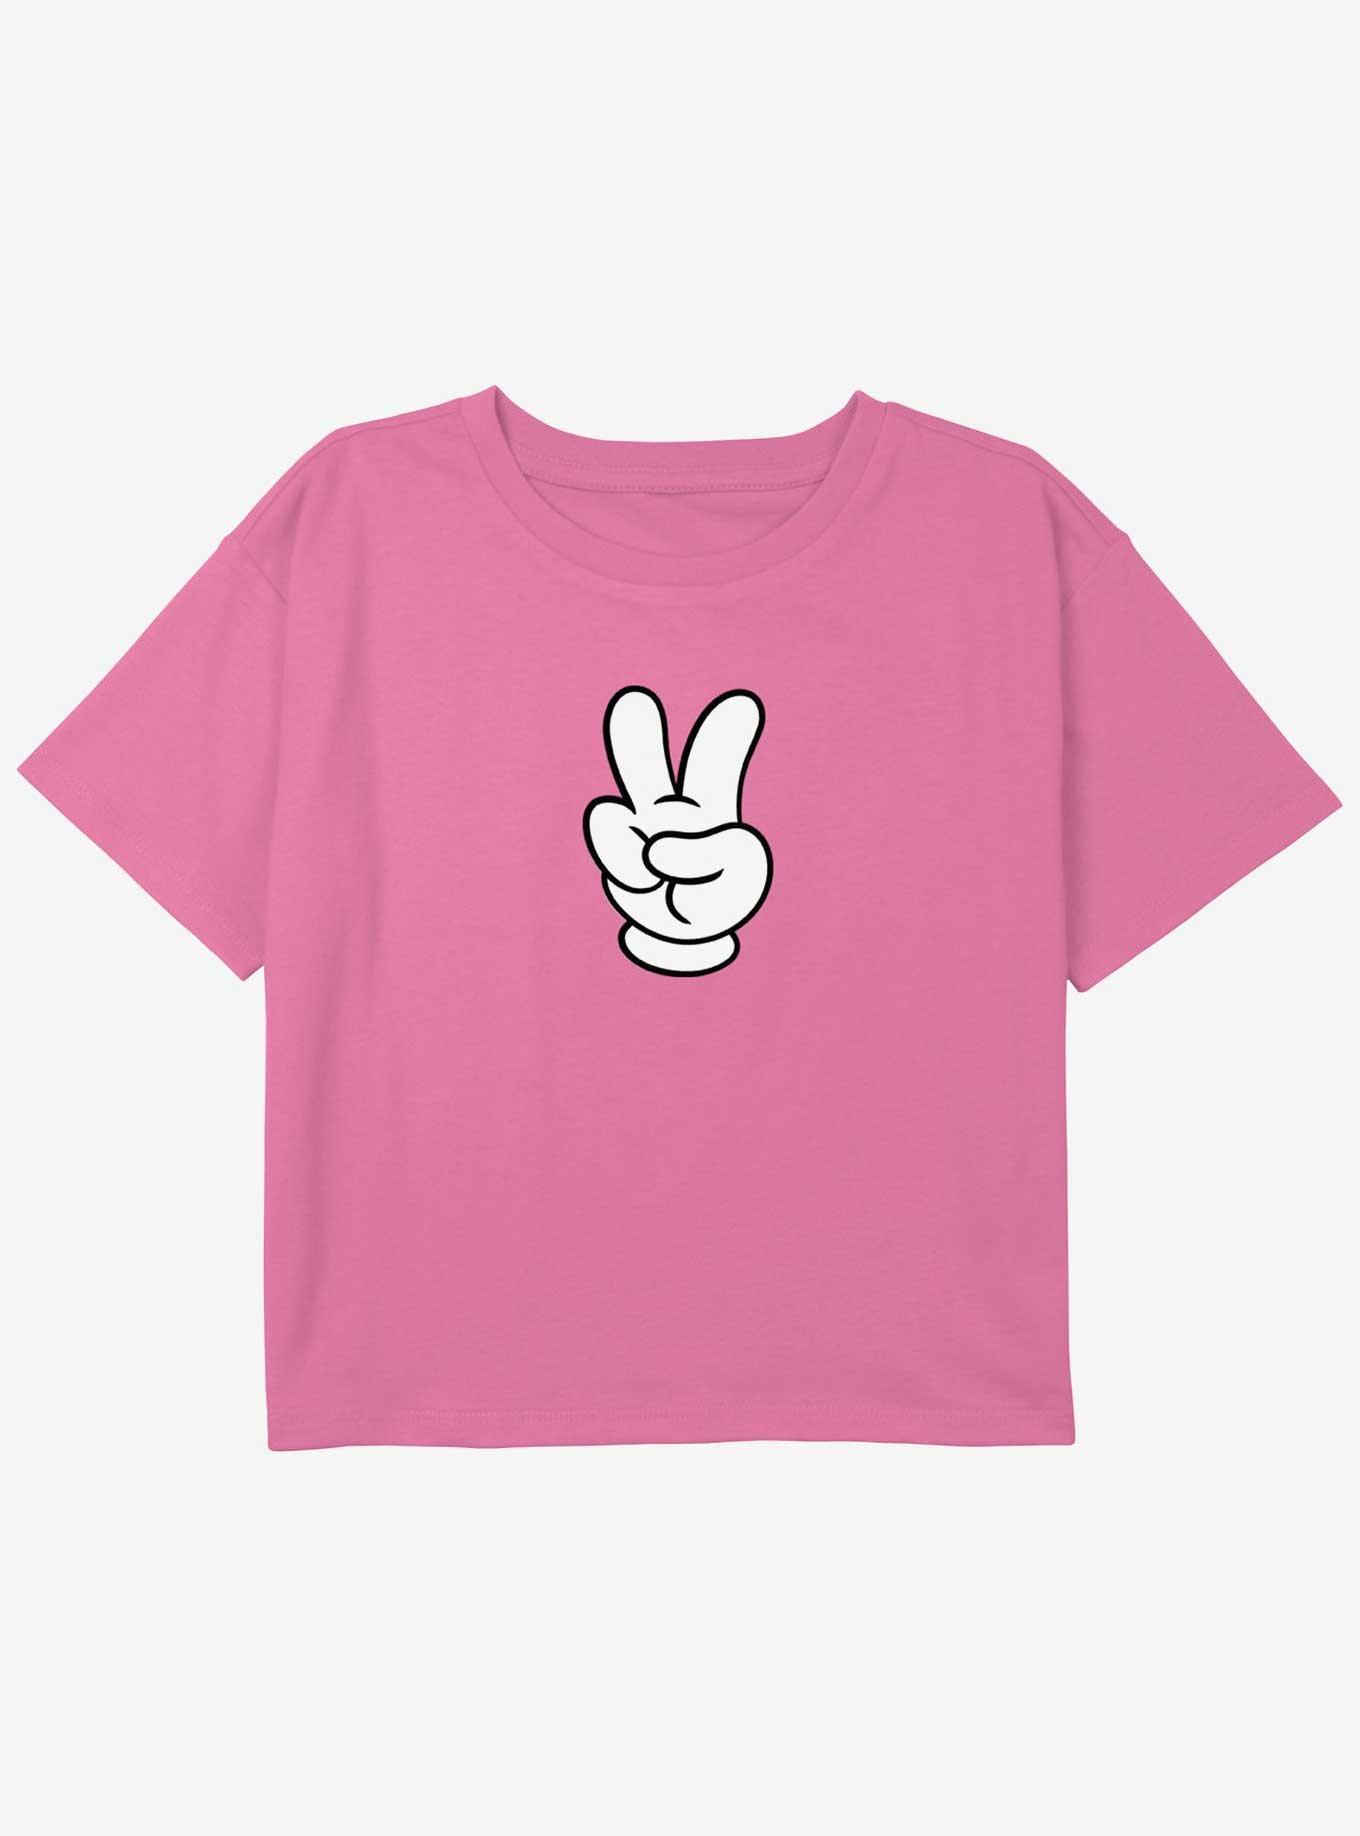 Disney Mickey Mouse Hand Peace Sign Youth Girls Boxy Crop T-Shirt, PINK, hi-res